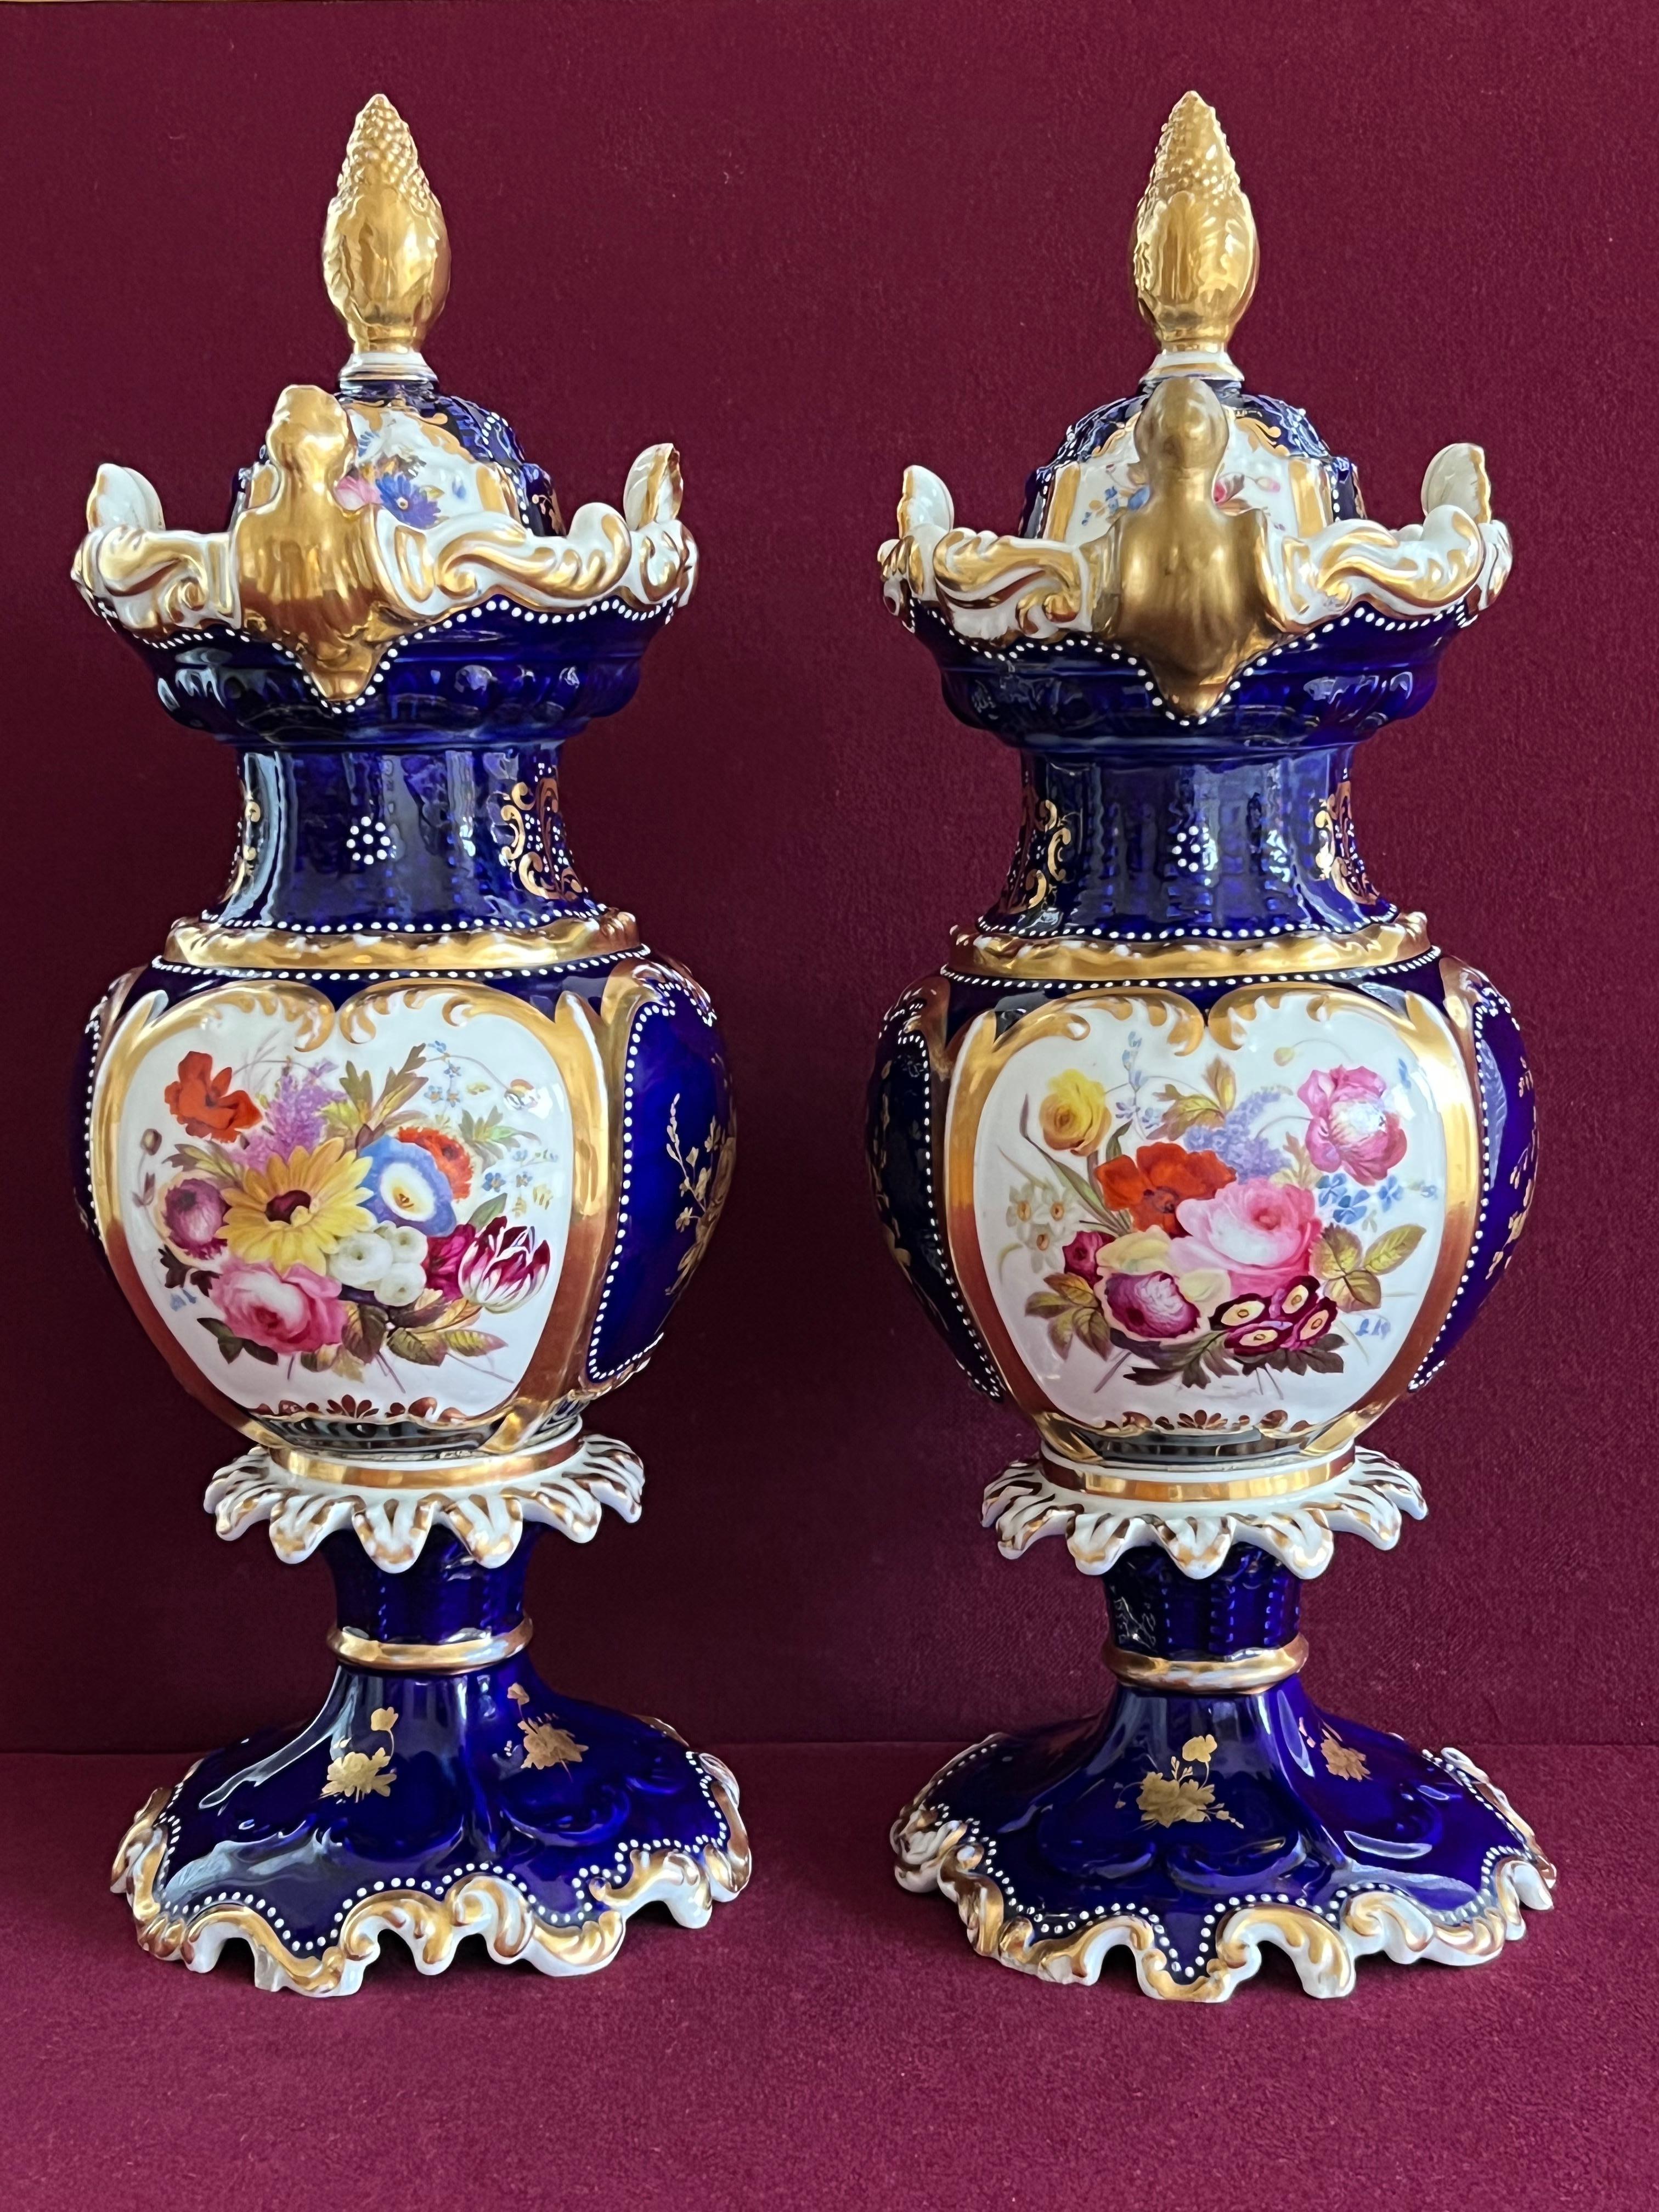 British Tall Pair of Chamberlain Worcester Porcelain Vases, circa 1842-1845 For Sale